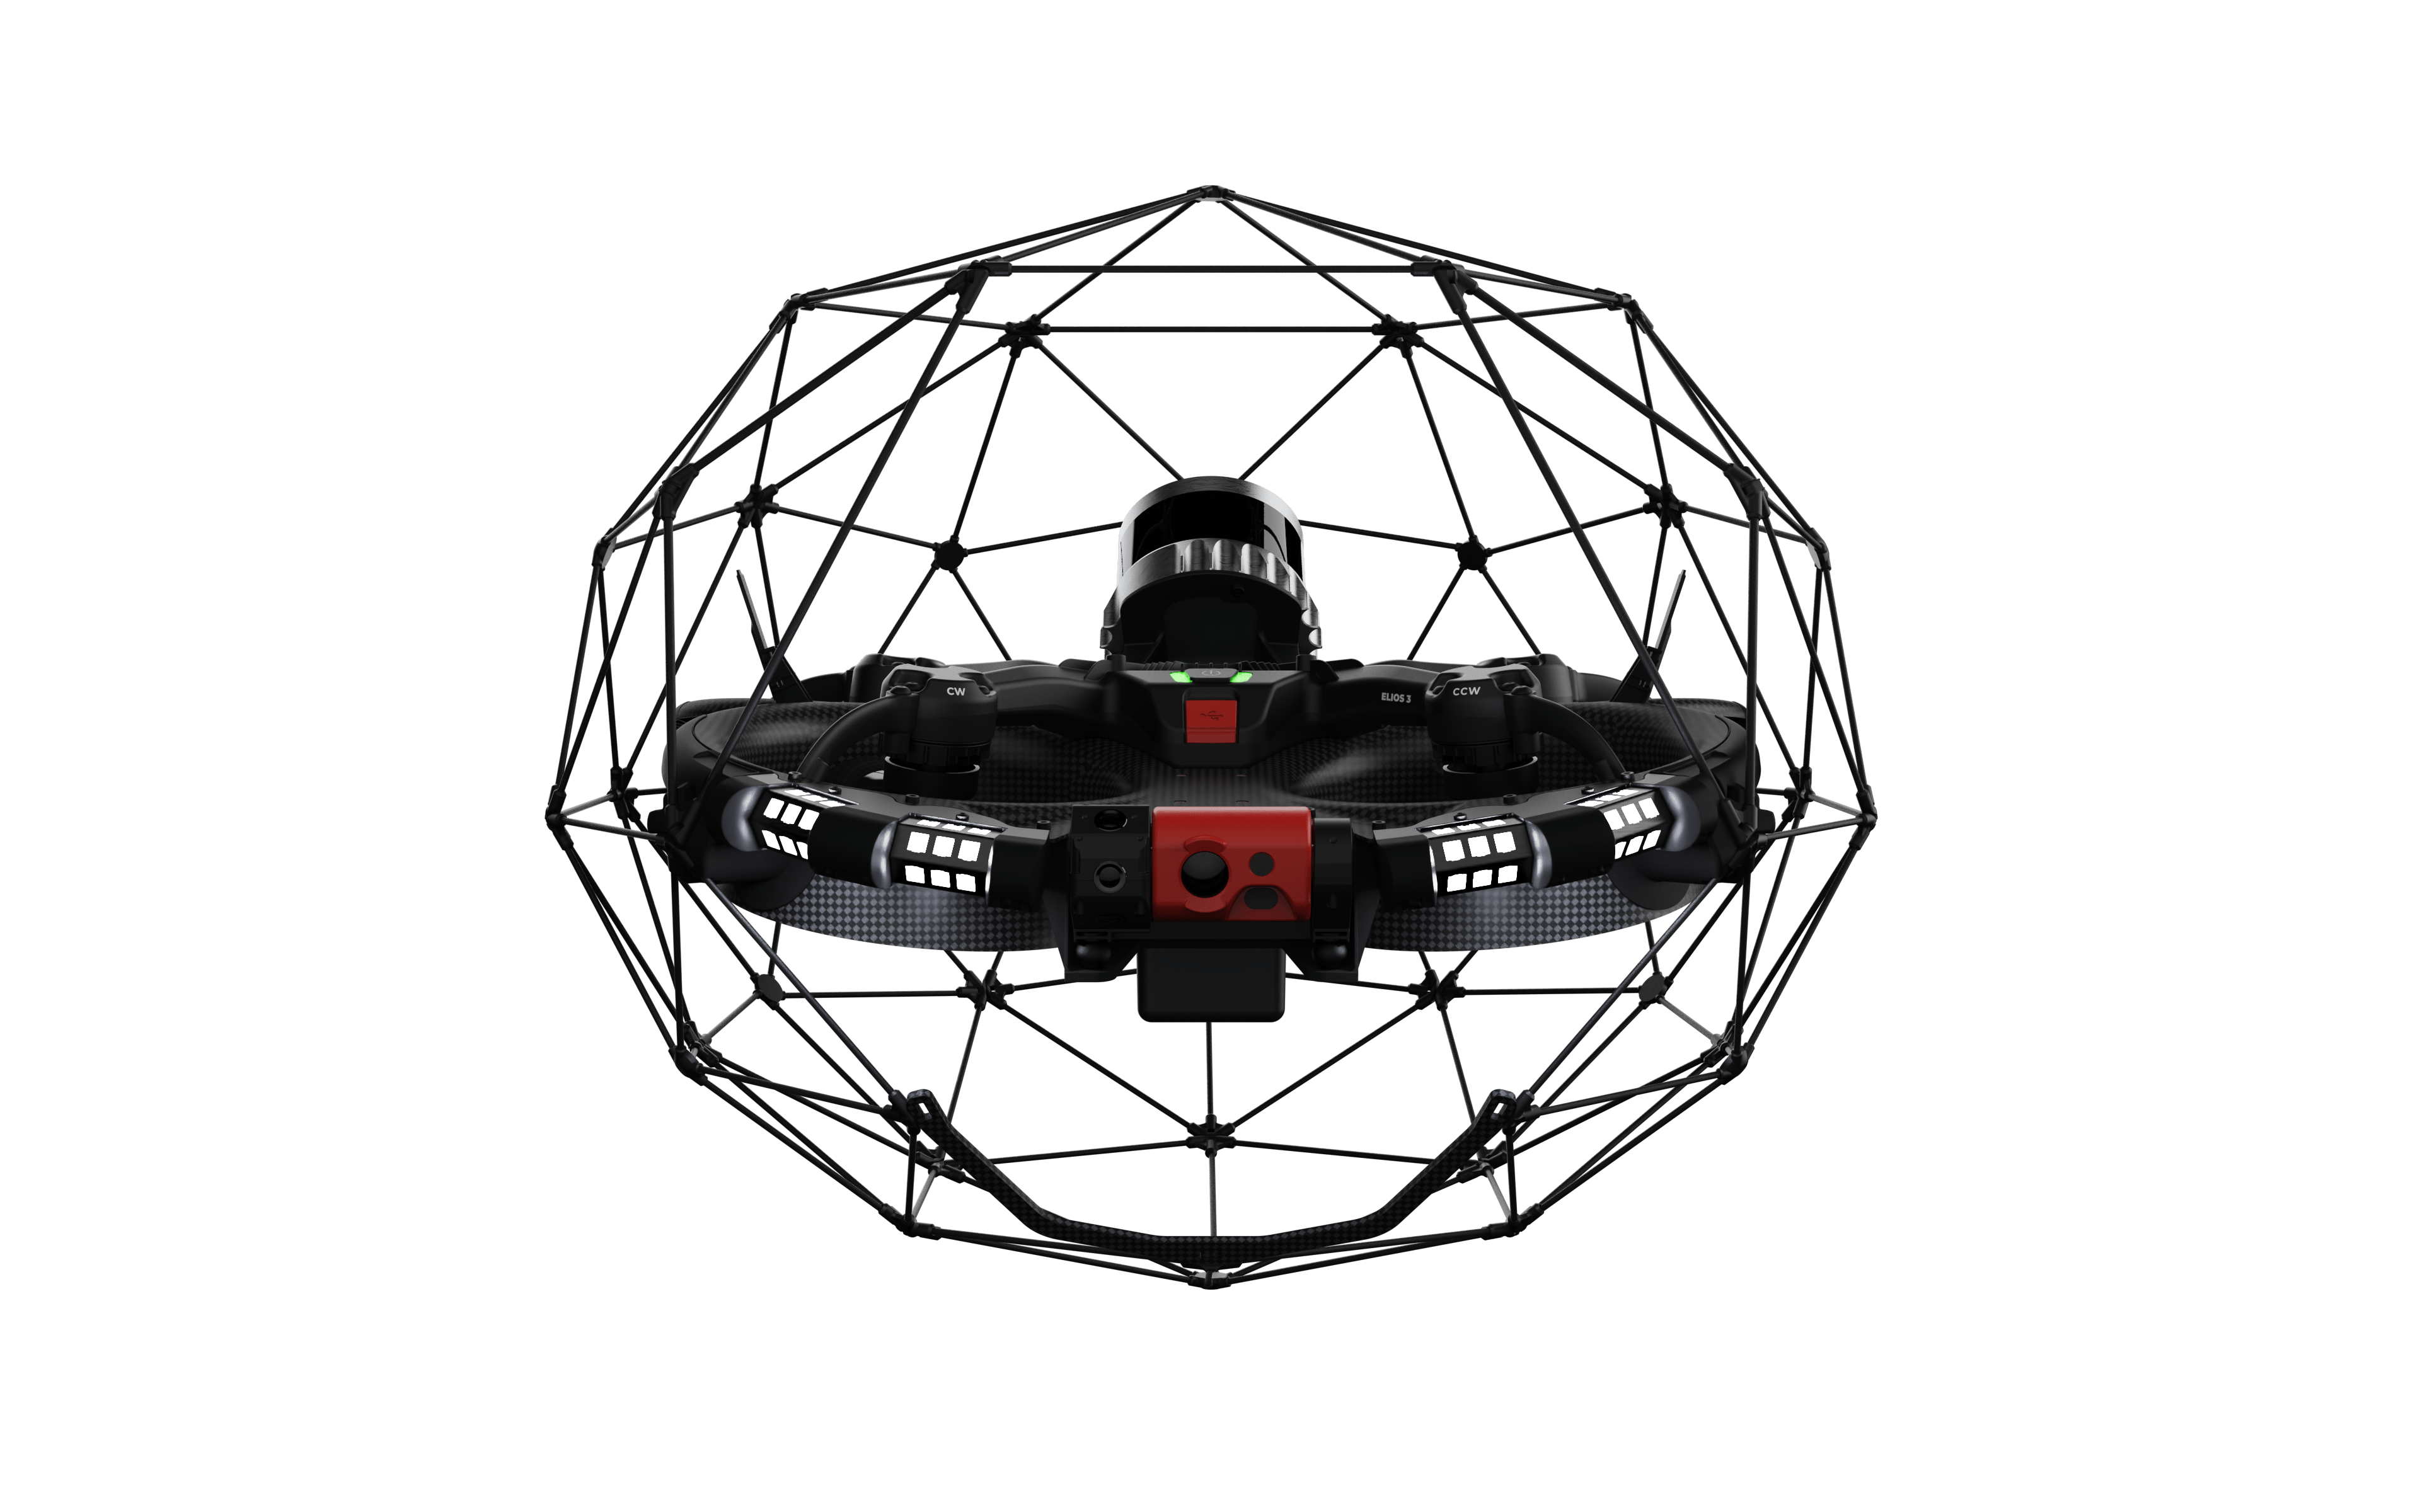 Flyability Elios 3 mapping and inspection indoor drone used by Sensorem.